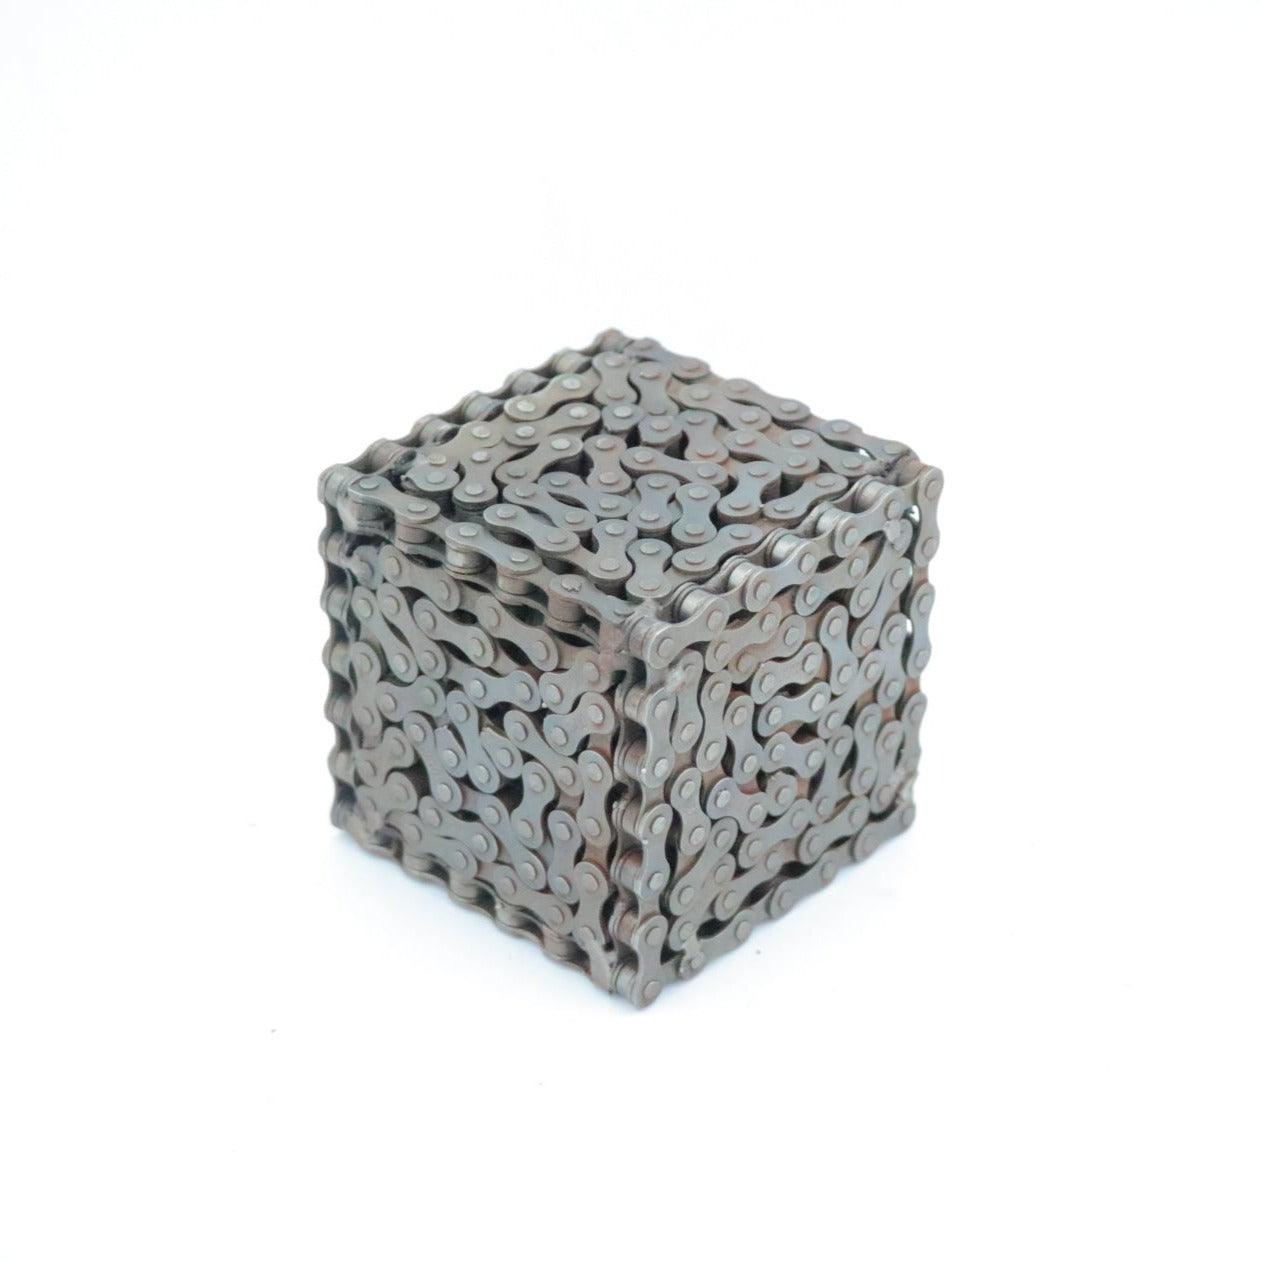 Cube Sculpture | UNCHAINED by NIRIT LEVAV PACKER